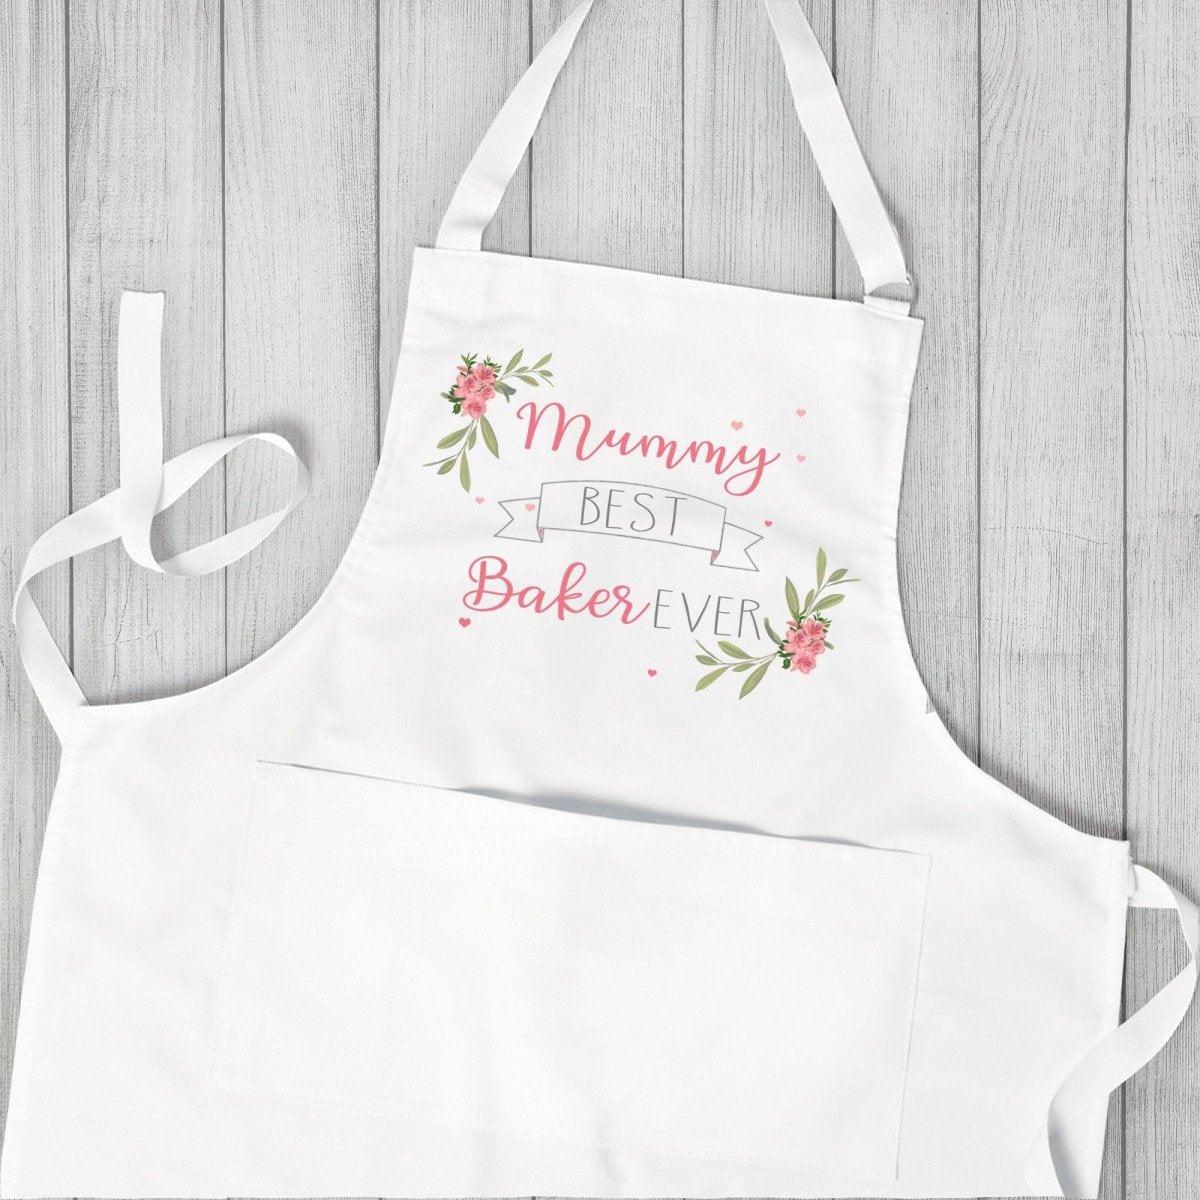 Personalised Mummy Apron, Mum Baking Gift, Personalized Apron Cooking Gift, Gifts for Mum, Kitchen Apron, Best Baker, Mum Christmas Gift - Amy Lucy